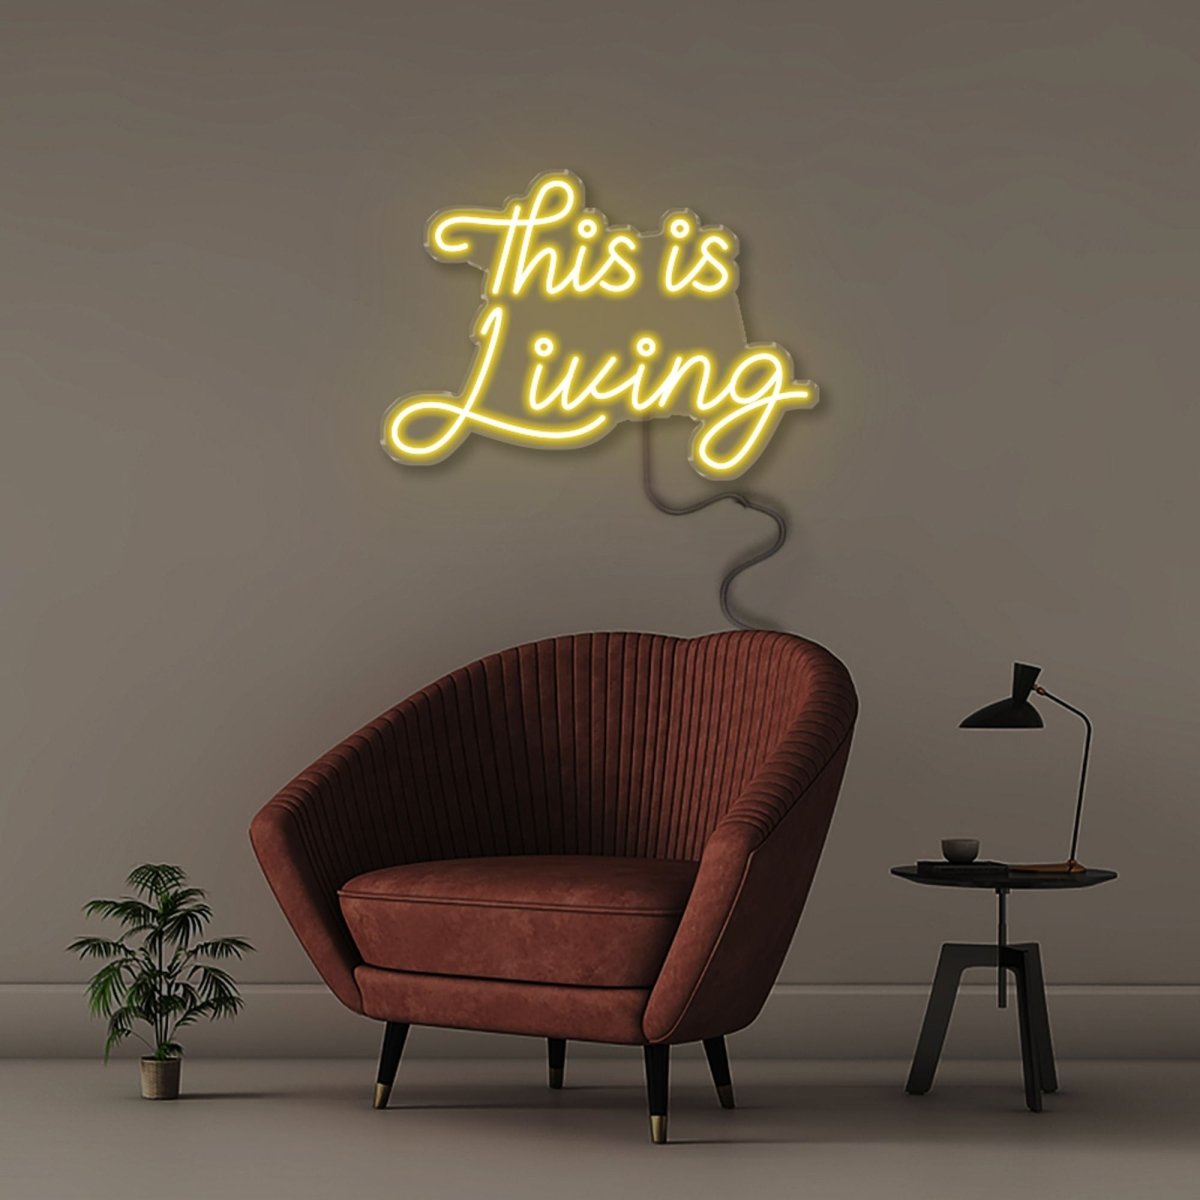 This Is Living - Neonific - LED Neon Signs - 61cm (24") -